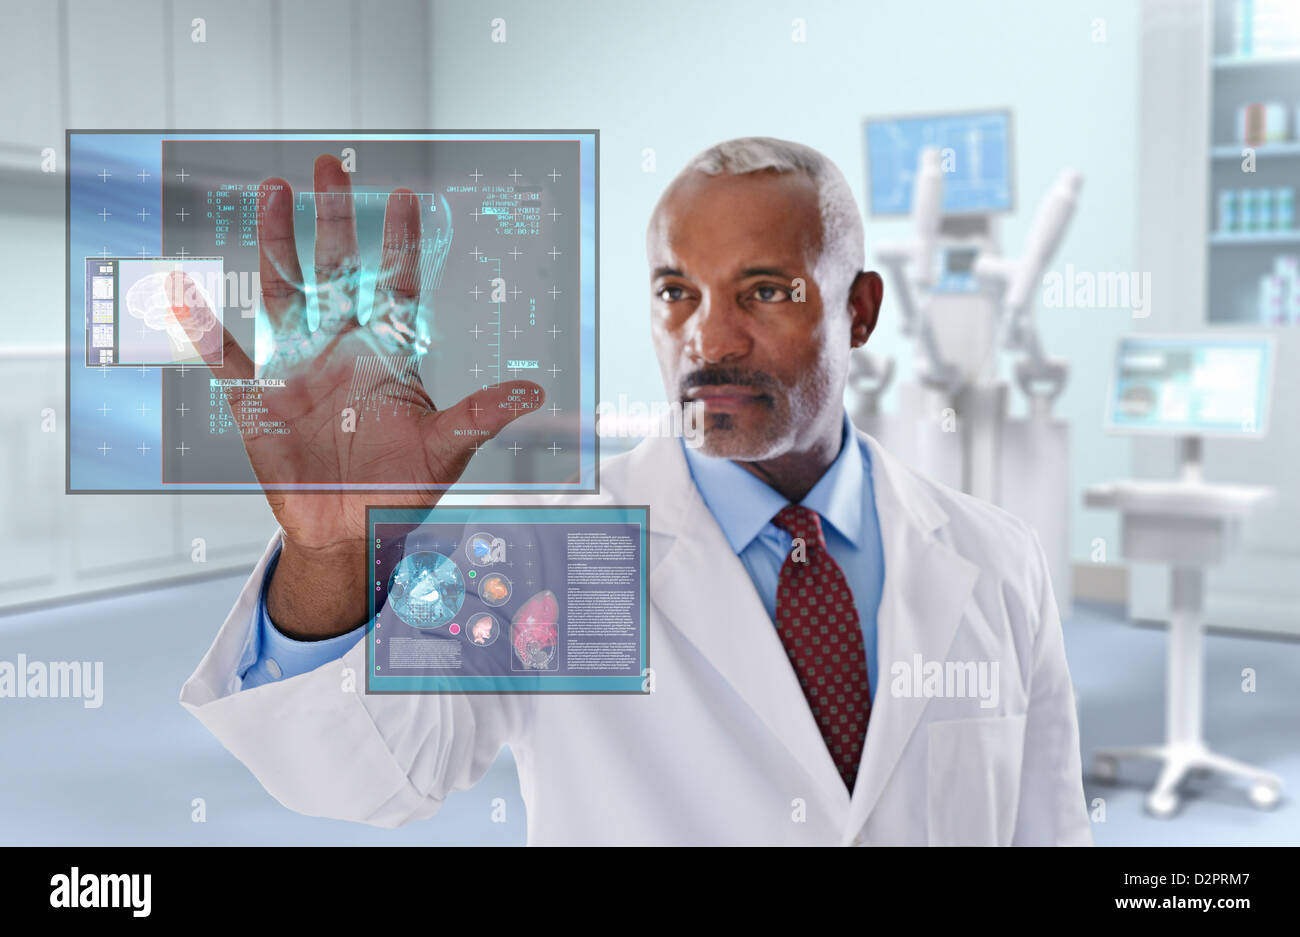 Black doctor looking at digital display in doctor's office Stock Photo